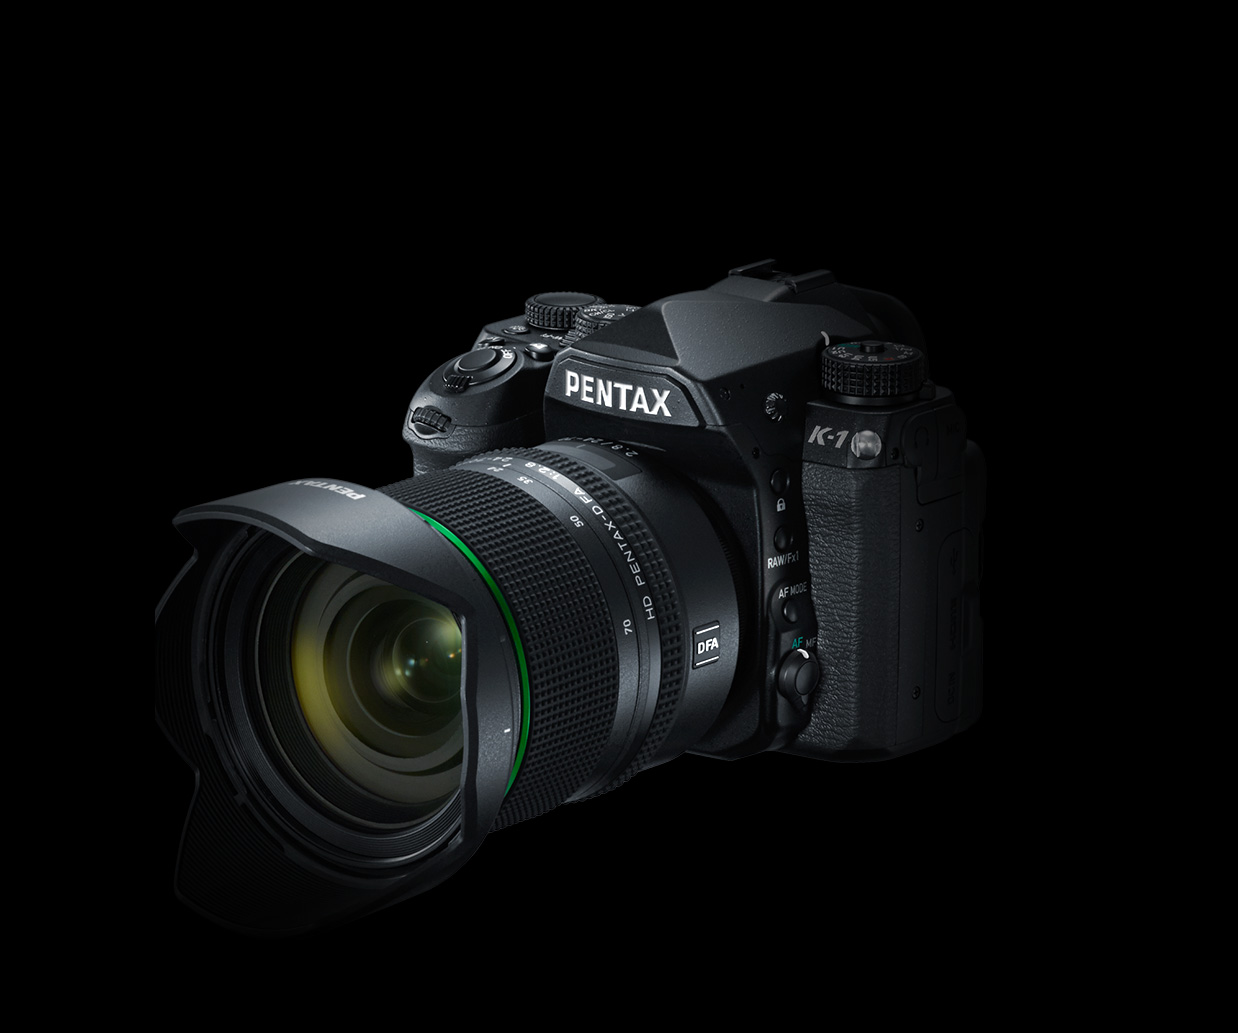 Pentax K-1 reviews and videos now available on the web